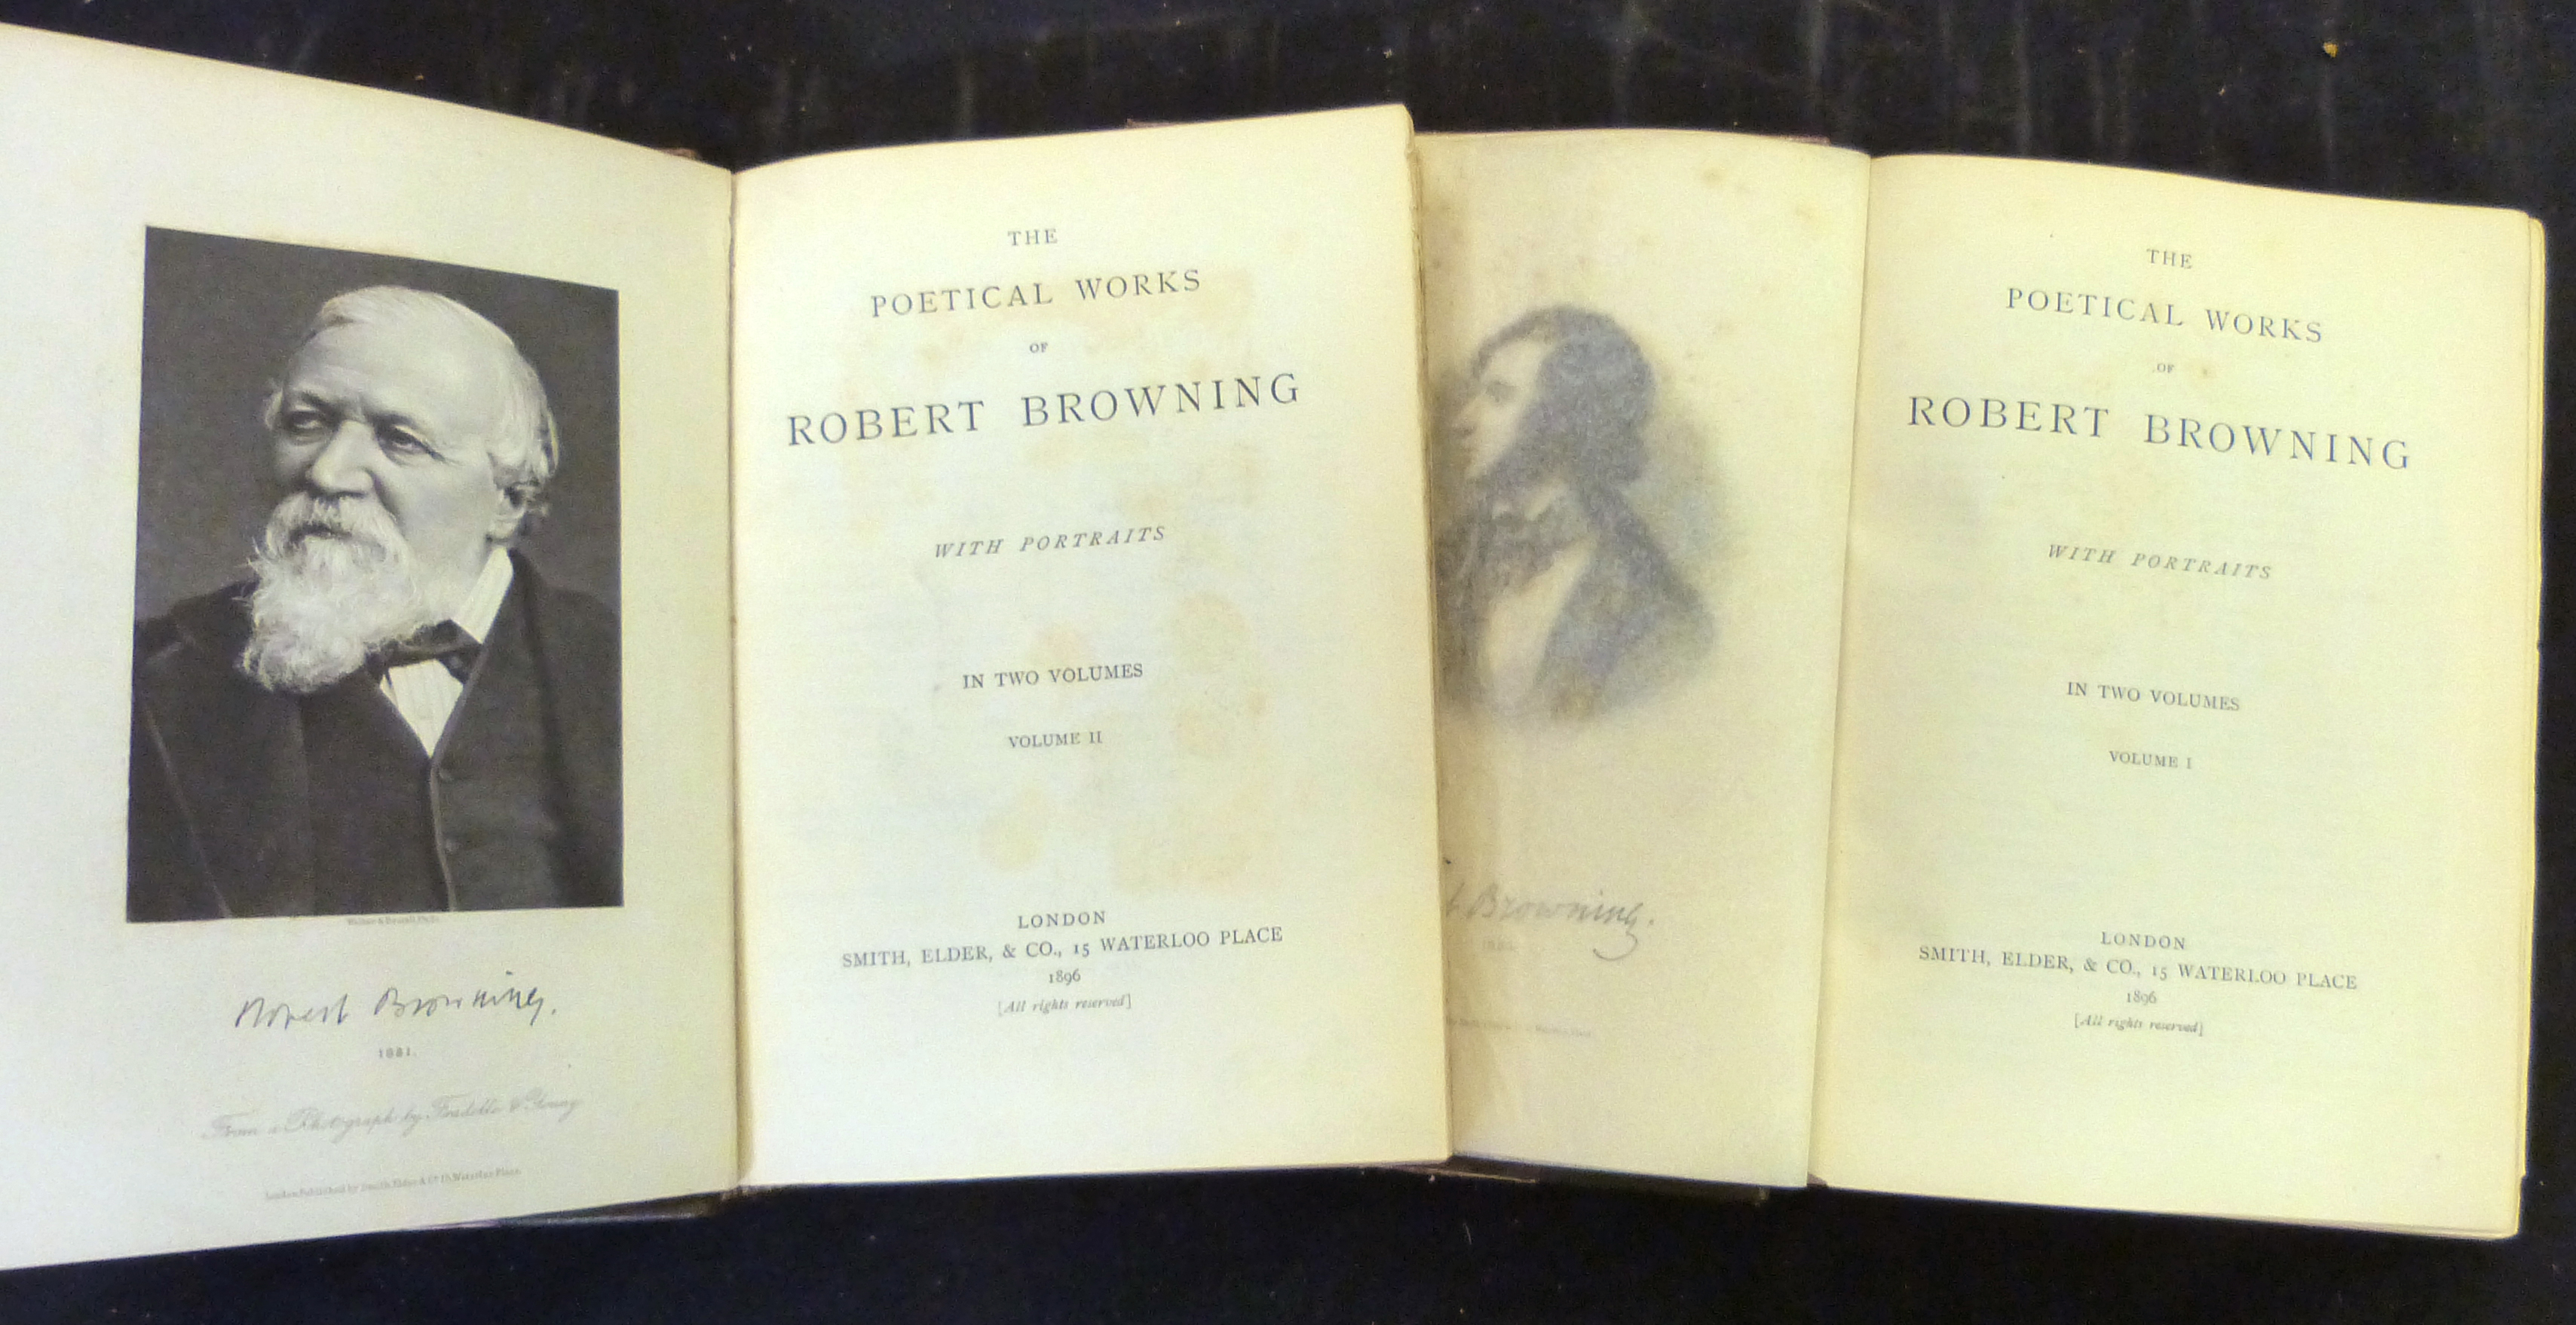 ROBERT BROWNING: THE POETICAL WORKS, London, Smith Elder & Co, 1896, 2 vols, portfrontispieces, - Image 3 of 3